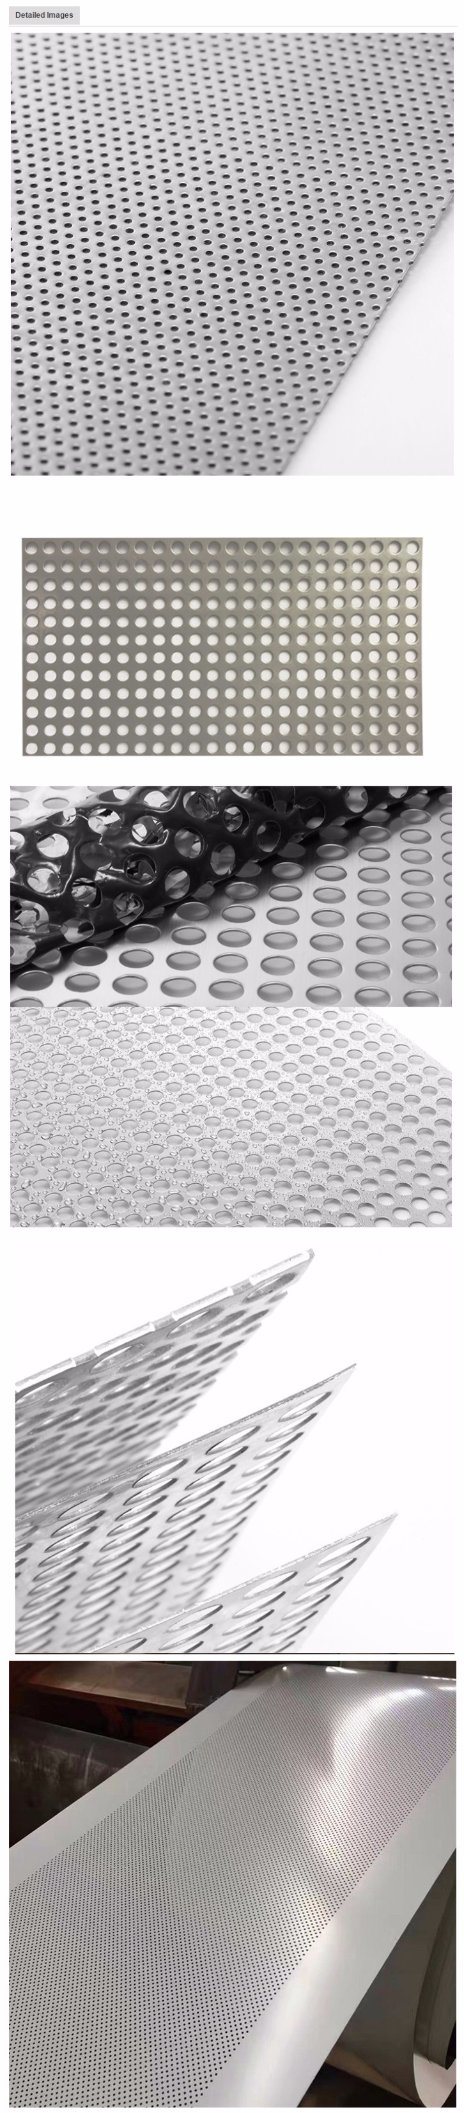 0.7mm Thick 3mm Pitch Stainless Steel Perforated Metal Sheet Plate